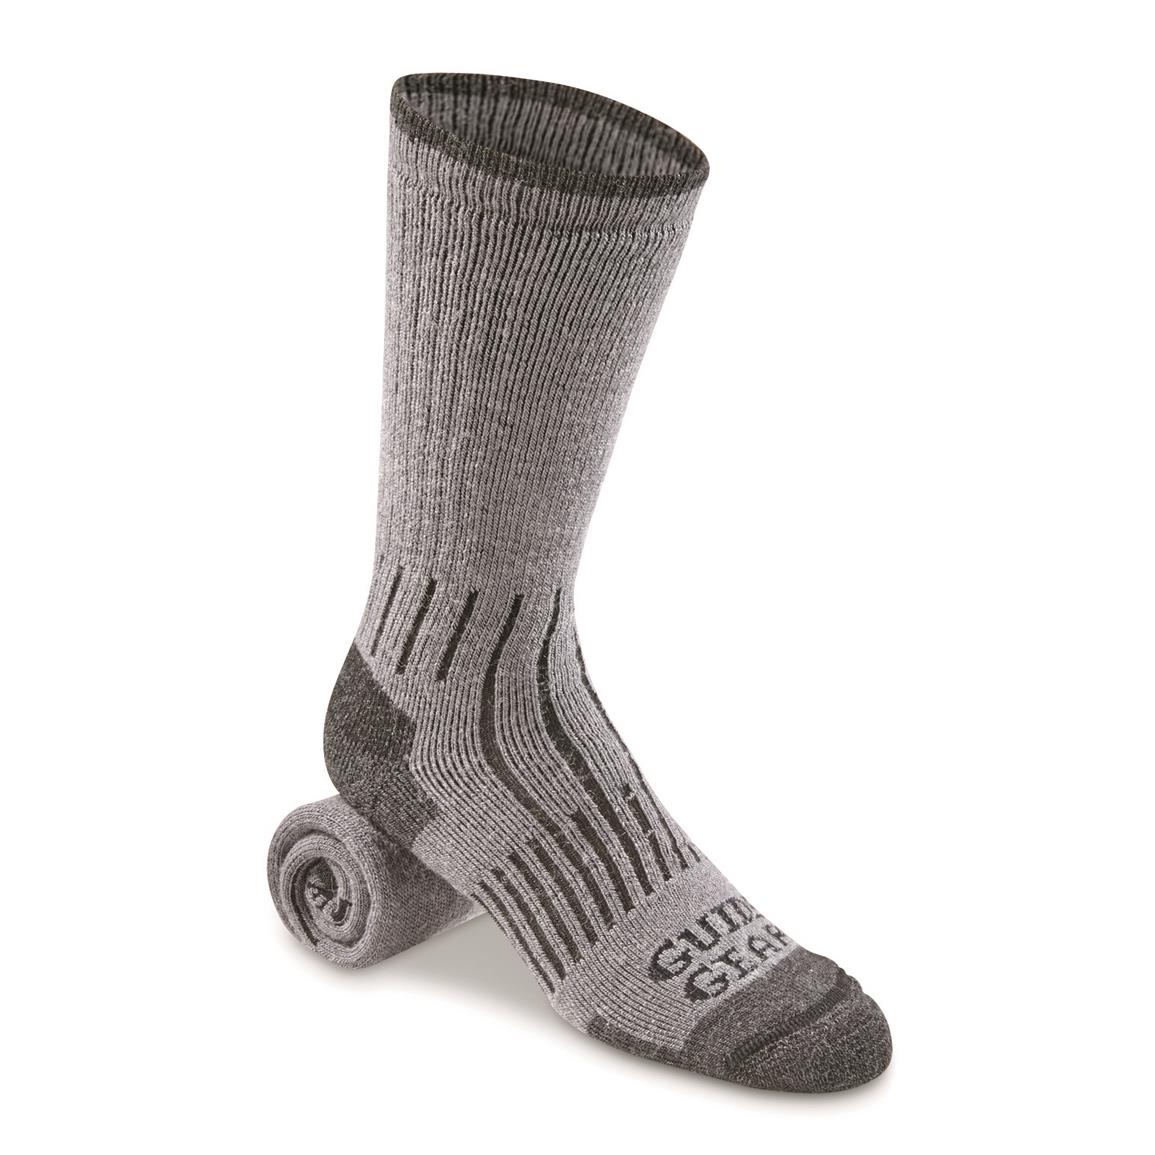 Guide Gear Midweight Lifetime Socks with NanoGLIDE, 3 Pairs, Charcoal